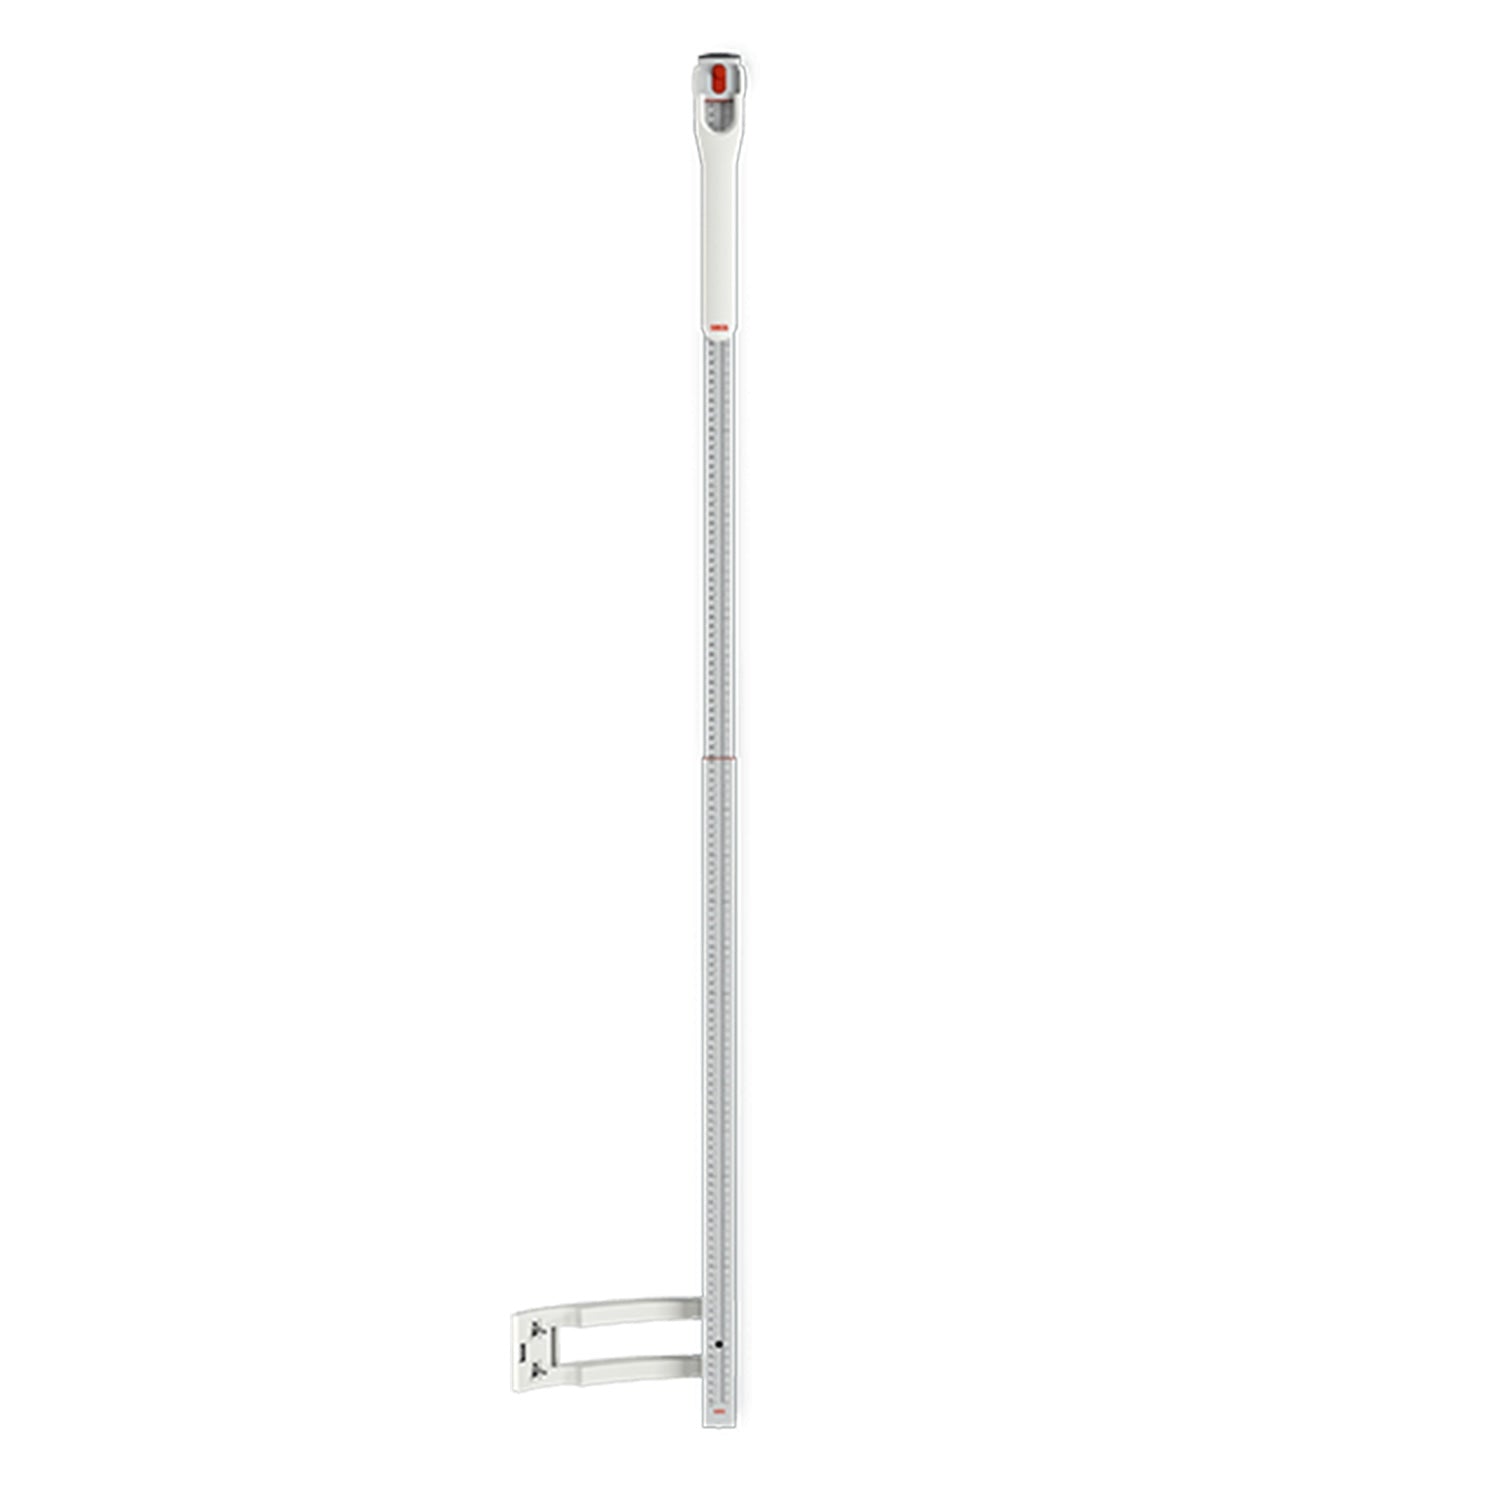 seca 224 Side-Mounted Telescopic Measuring Rod for Column Scales (1)